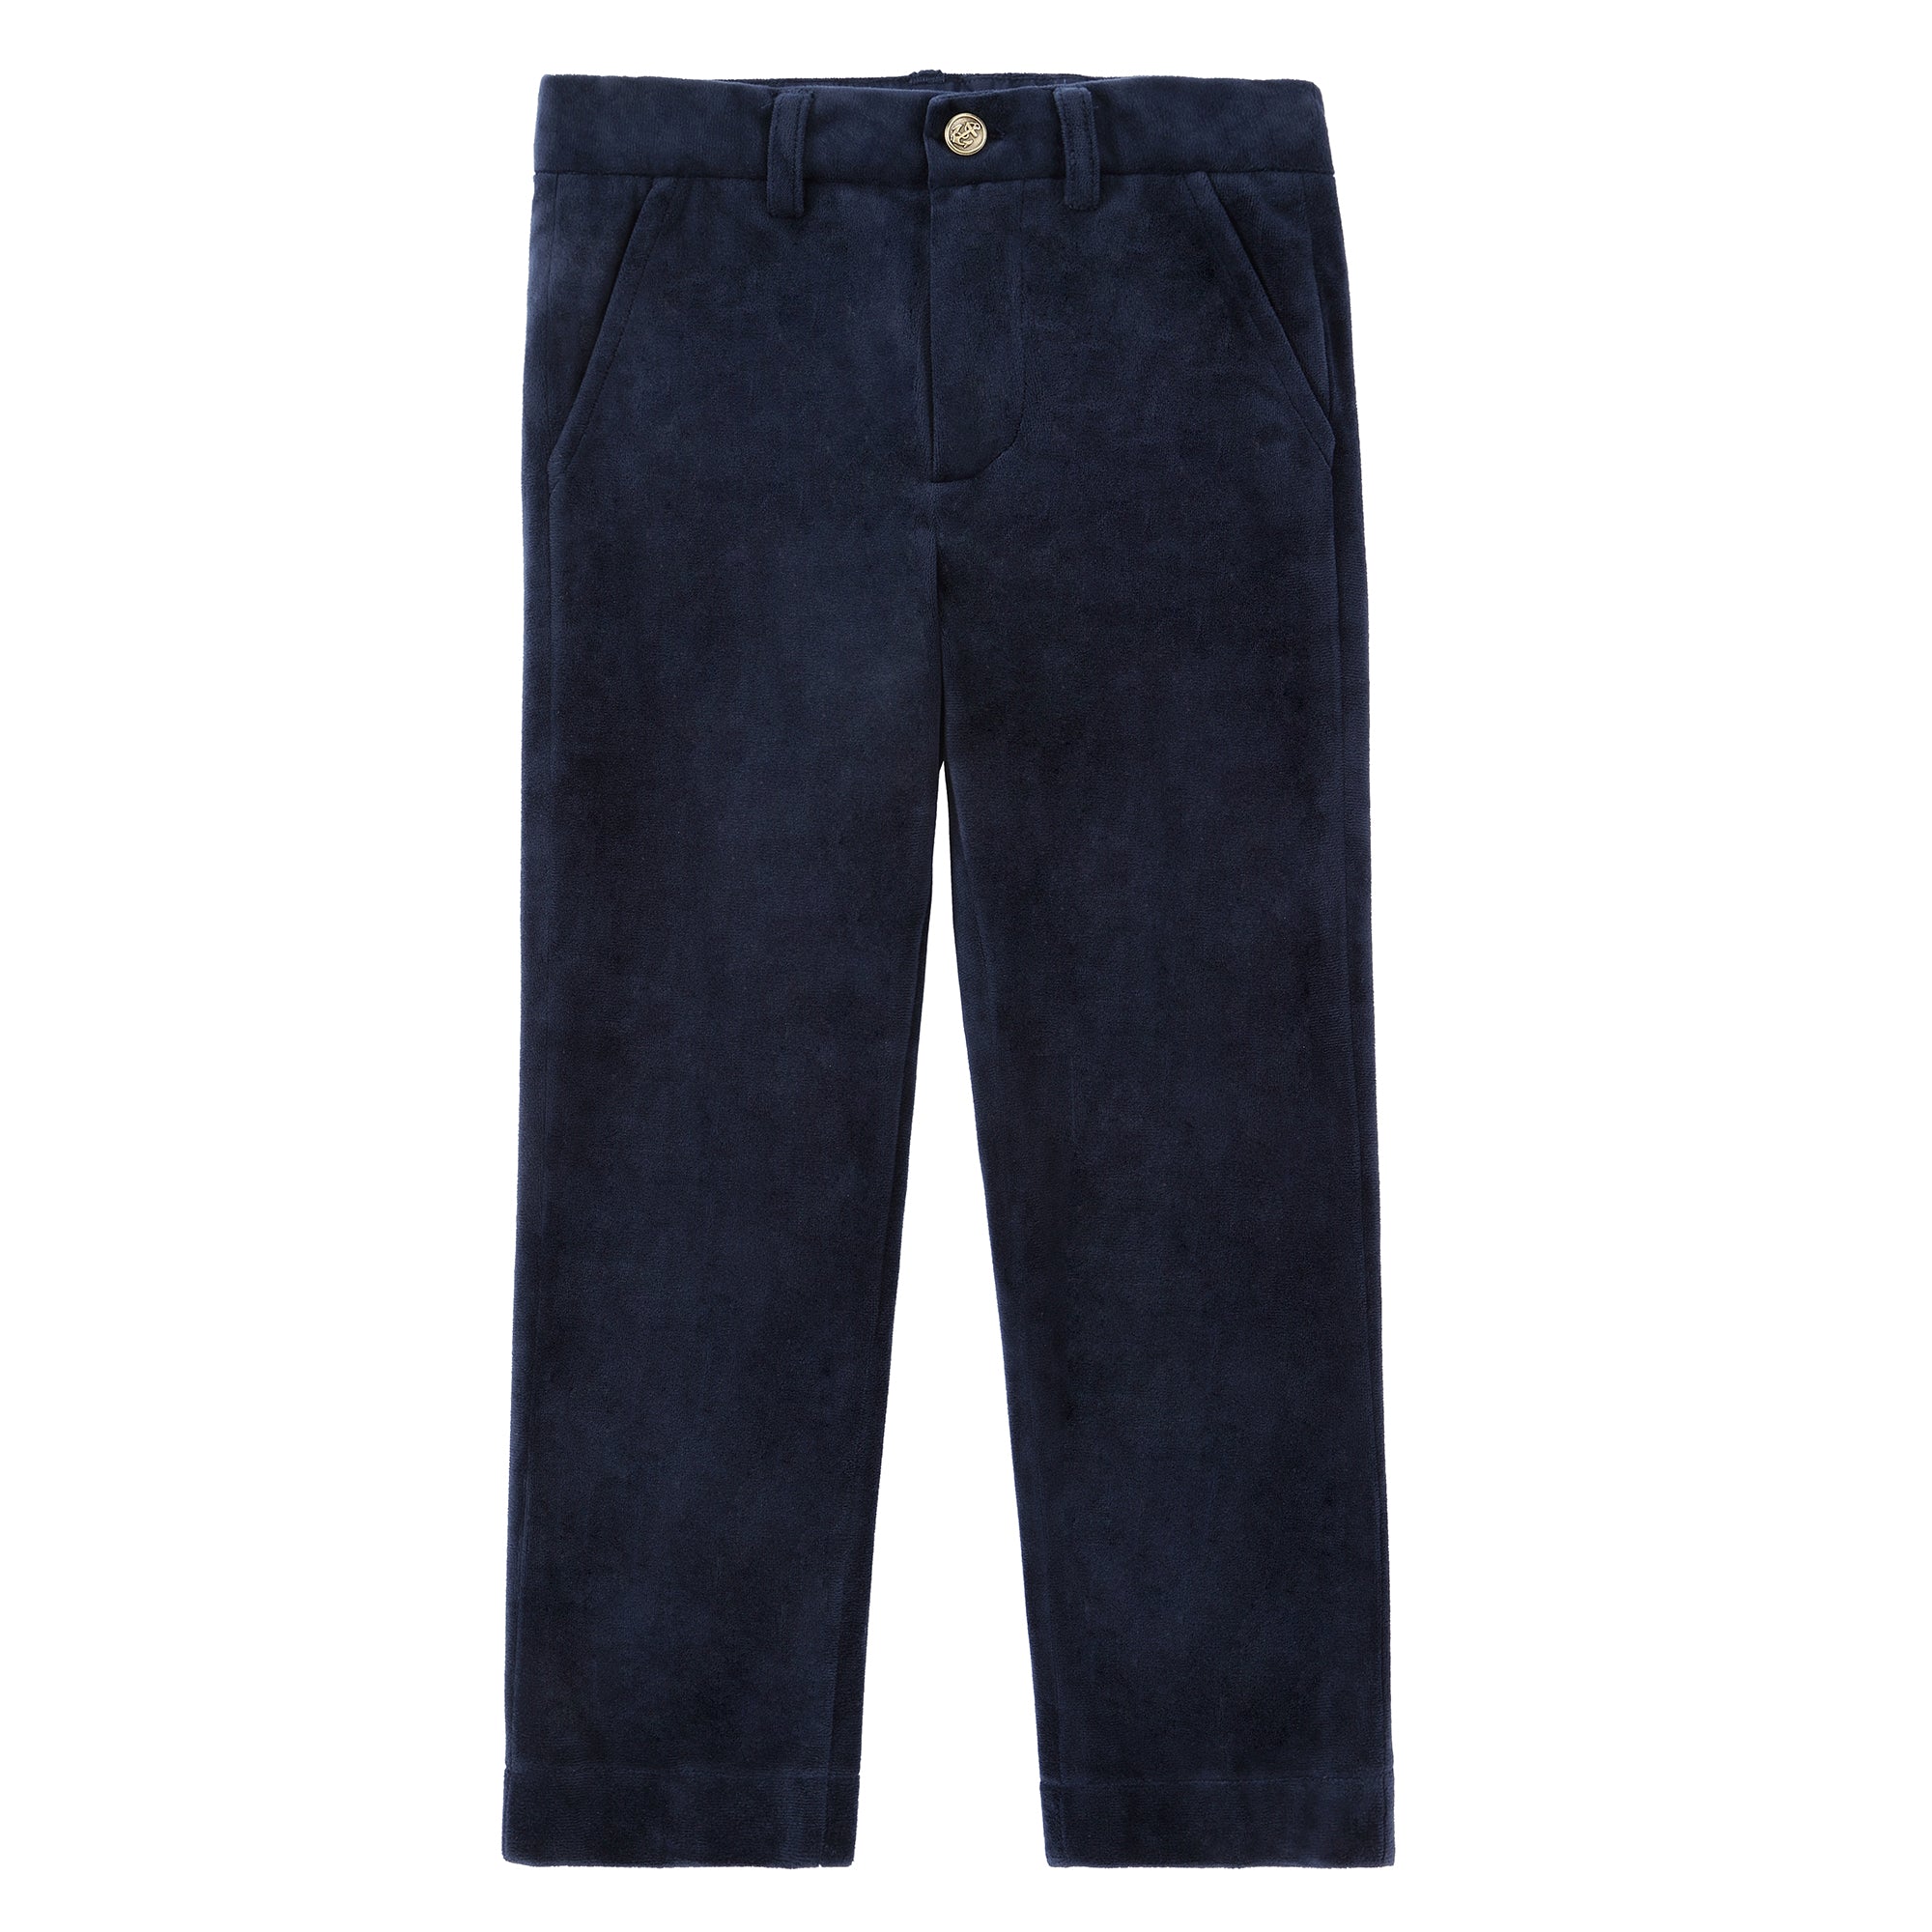 Navy Velvet Pants With Gold Buttons